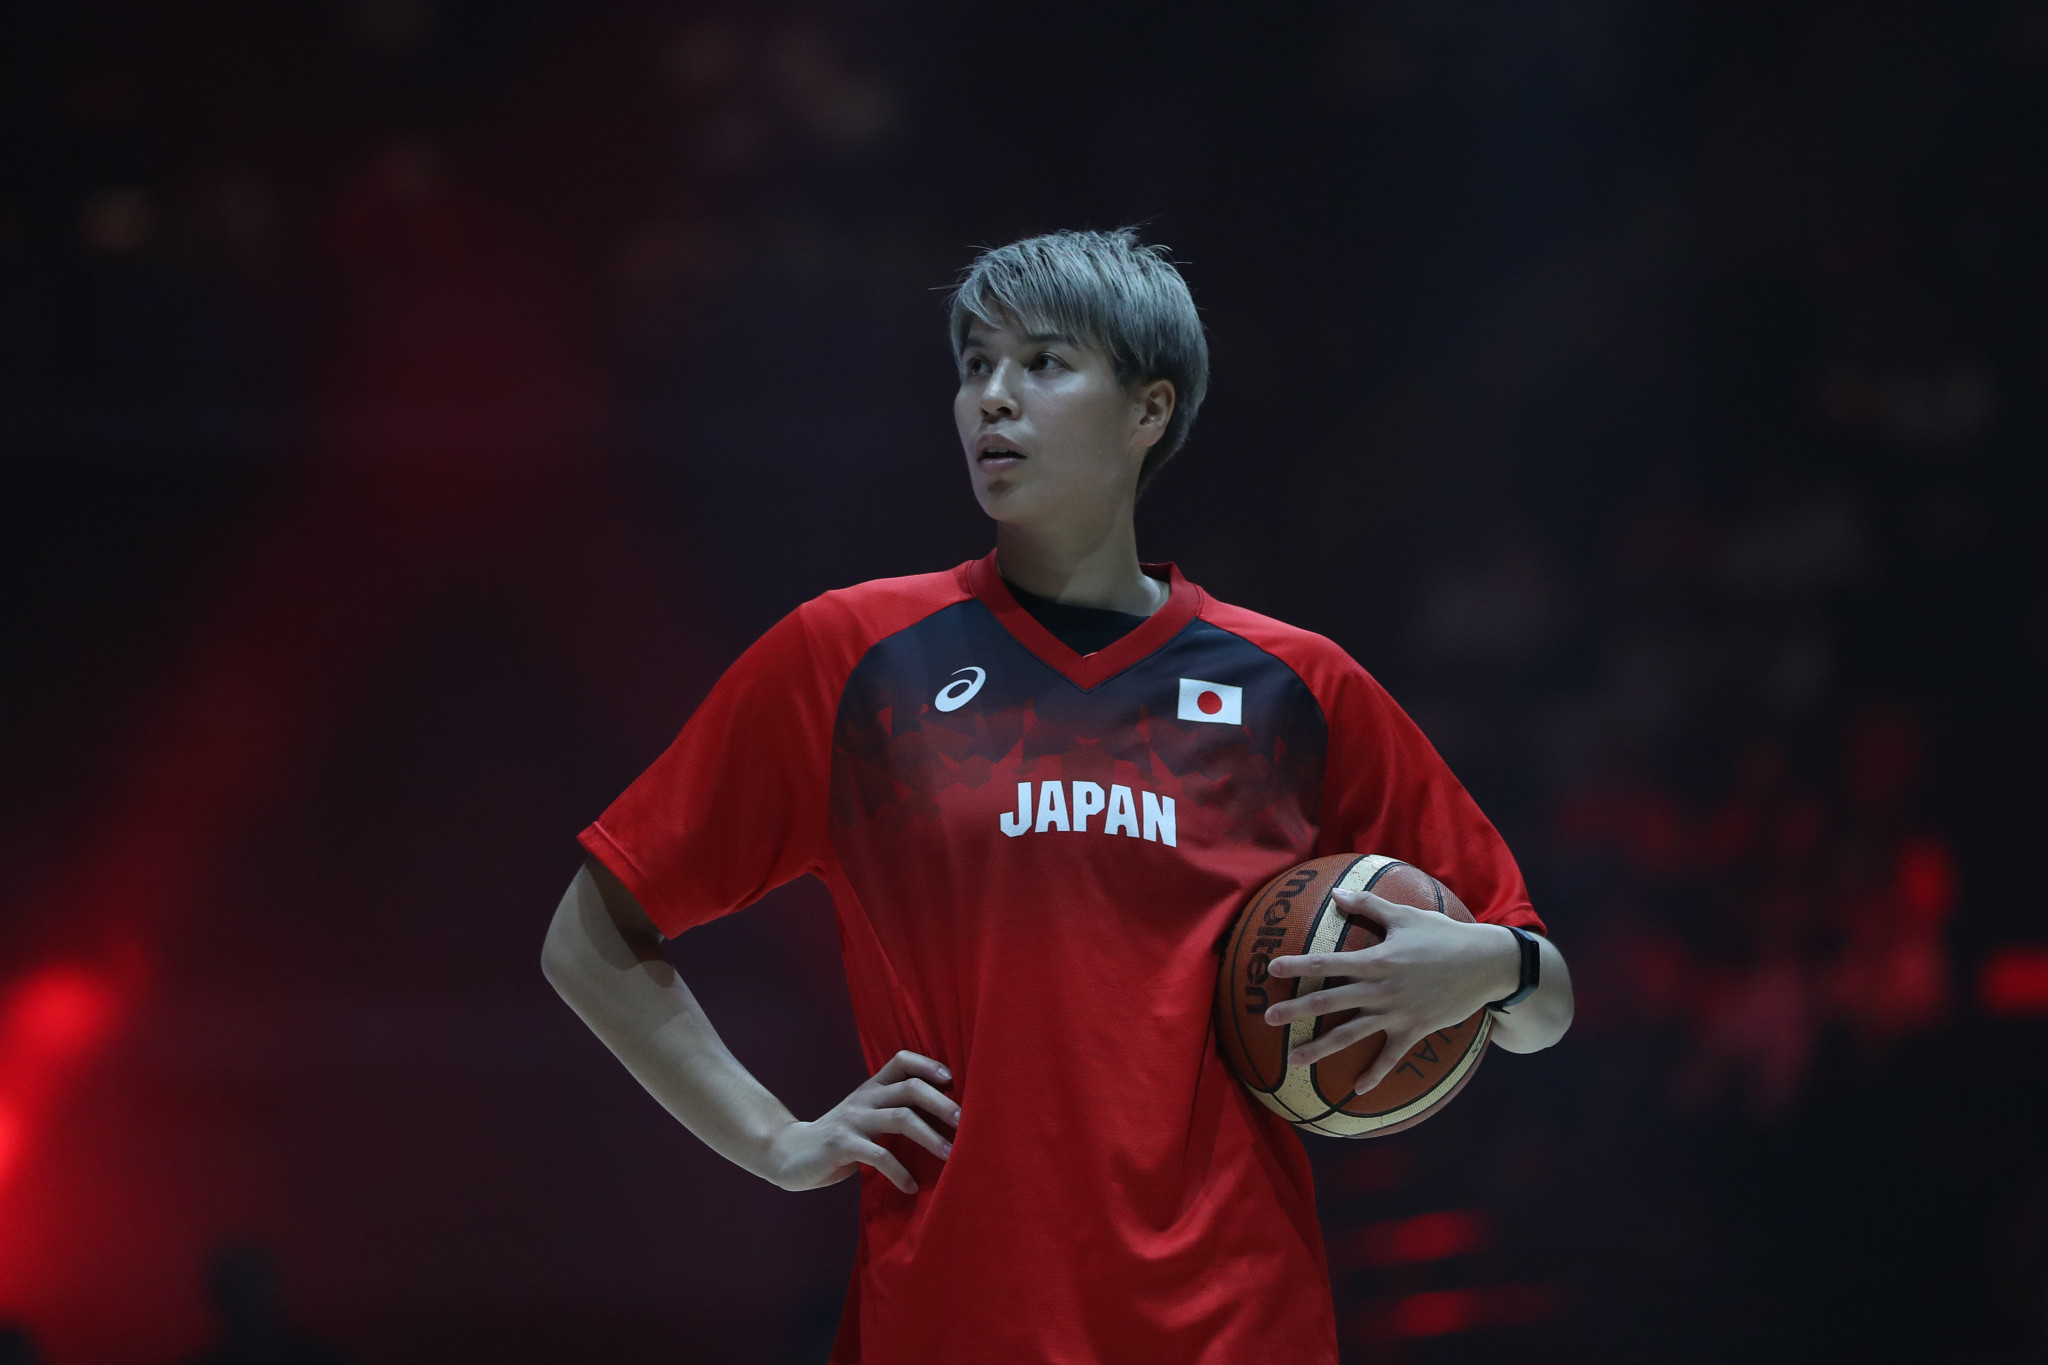 Japanese women's basketball team suffers blow to Tokyo 2020 medal hopes as Tokashiki tears ACL